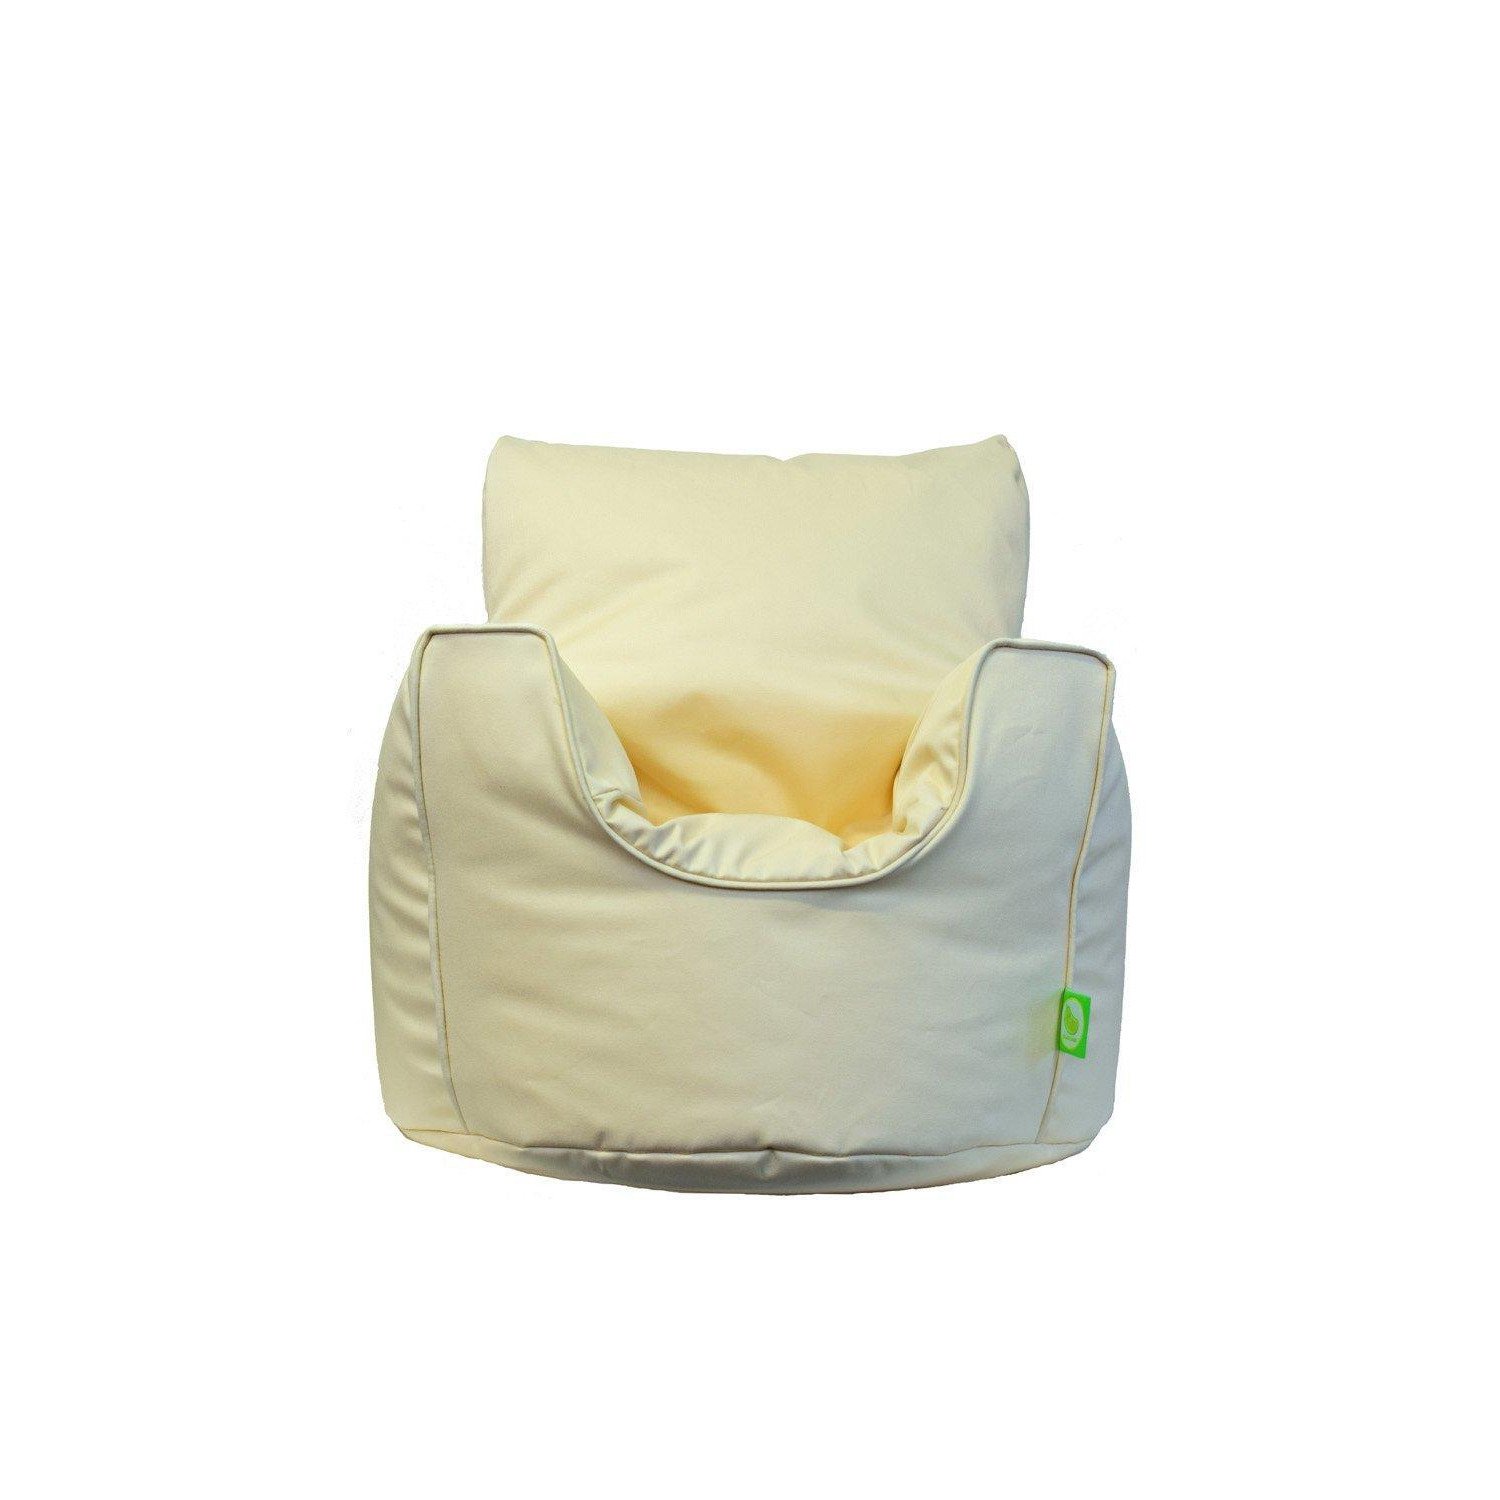 Cotton Twill Natural Bean Bag Arm Chair Toddler Size - image 1